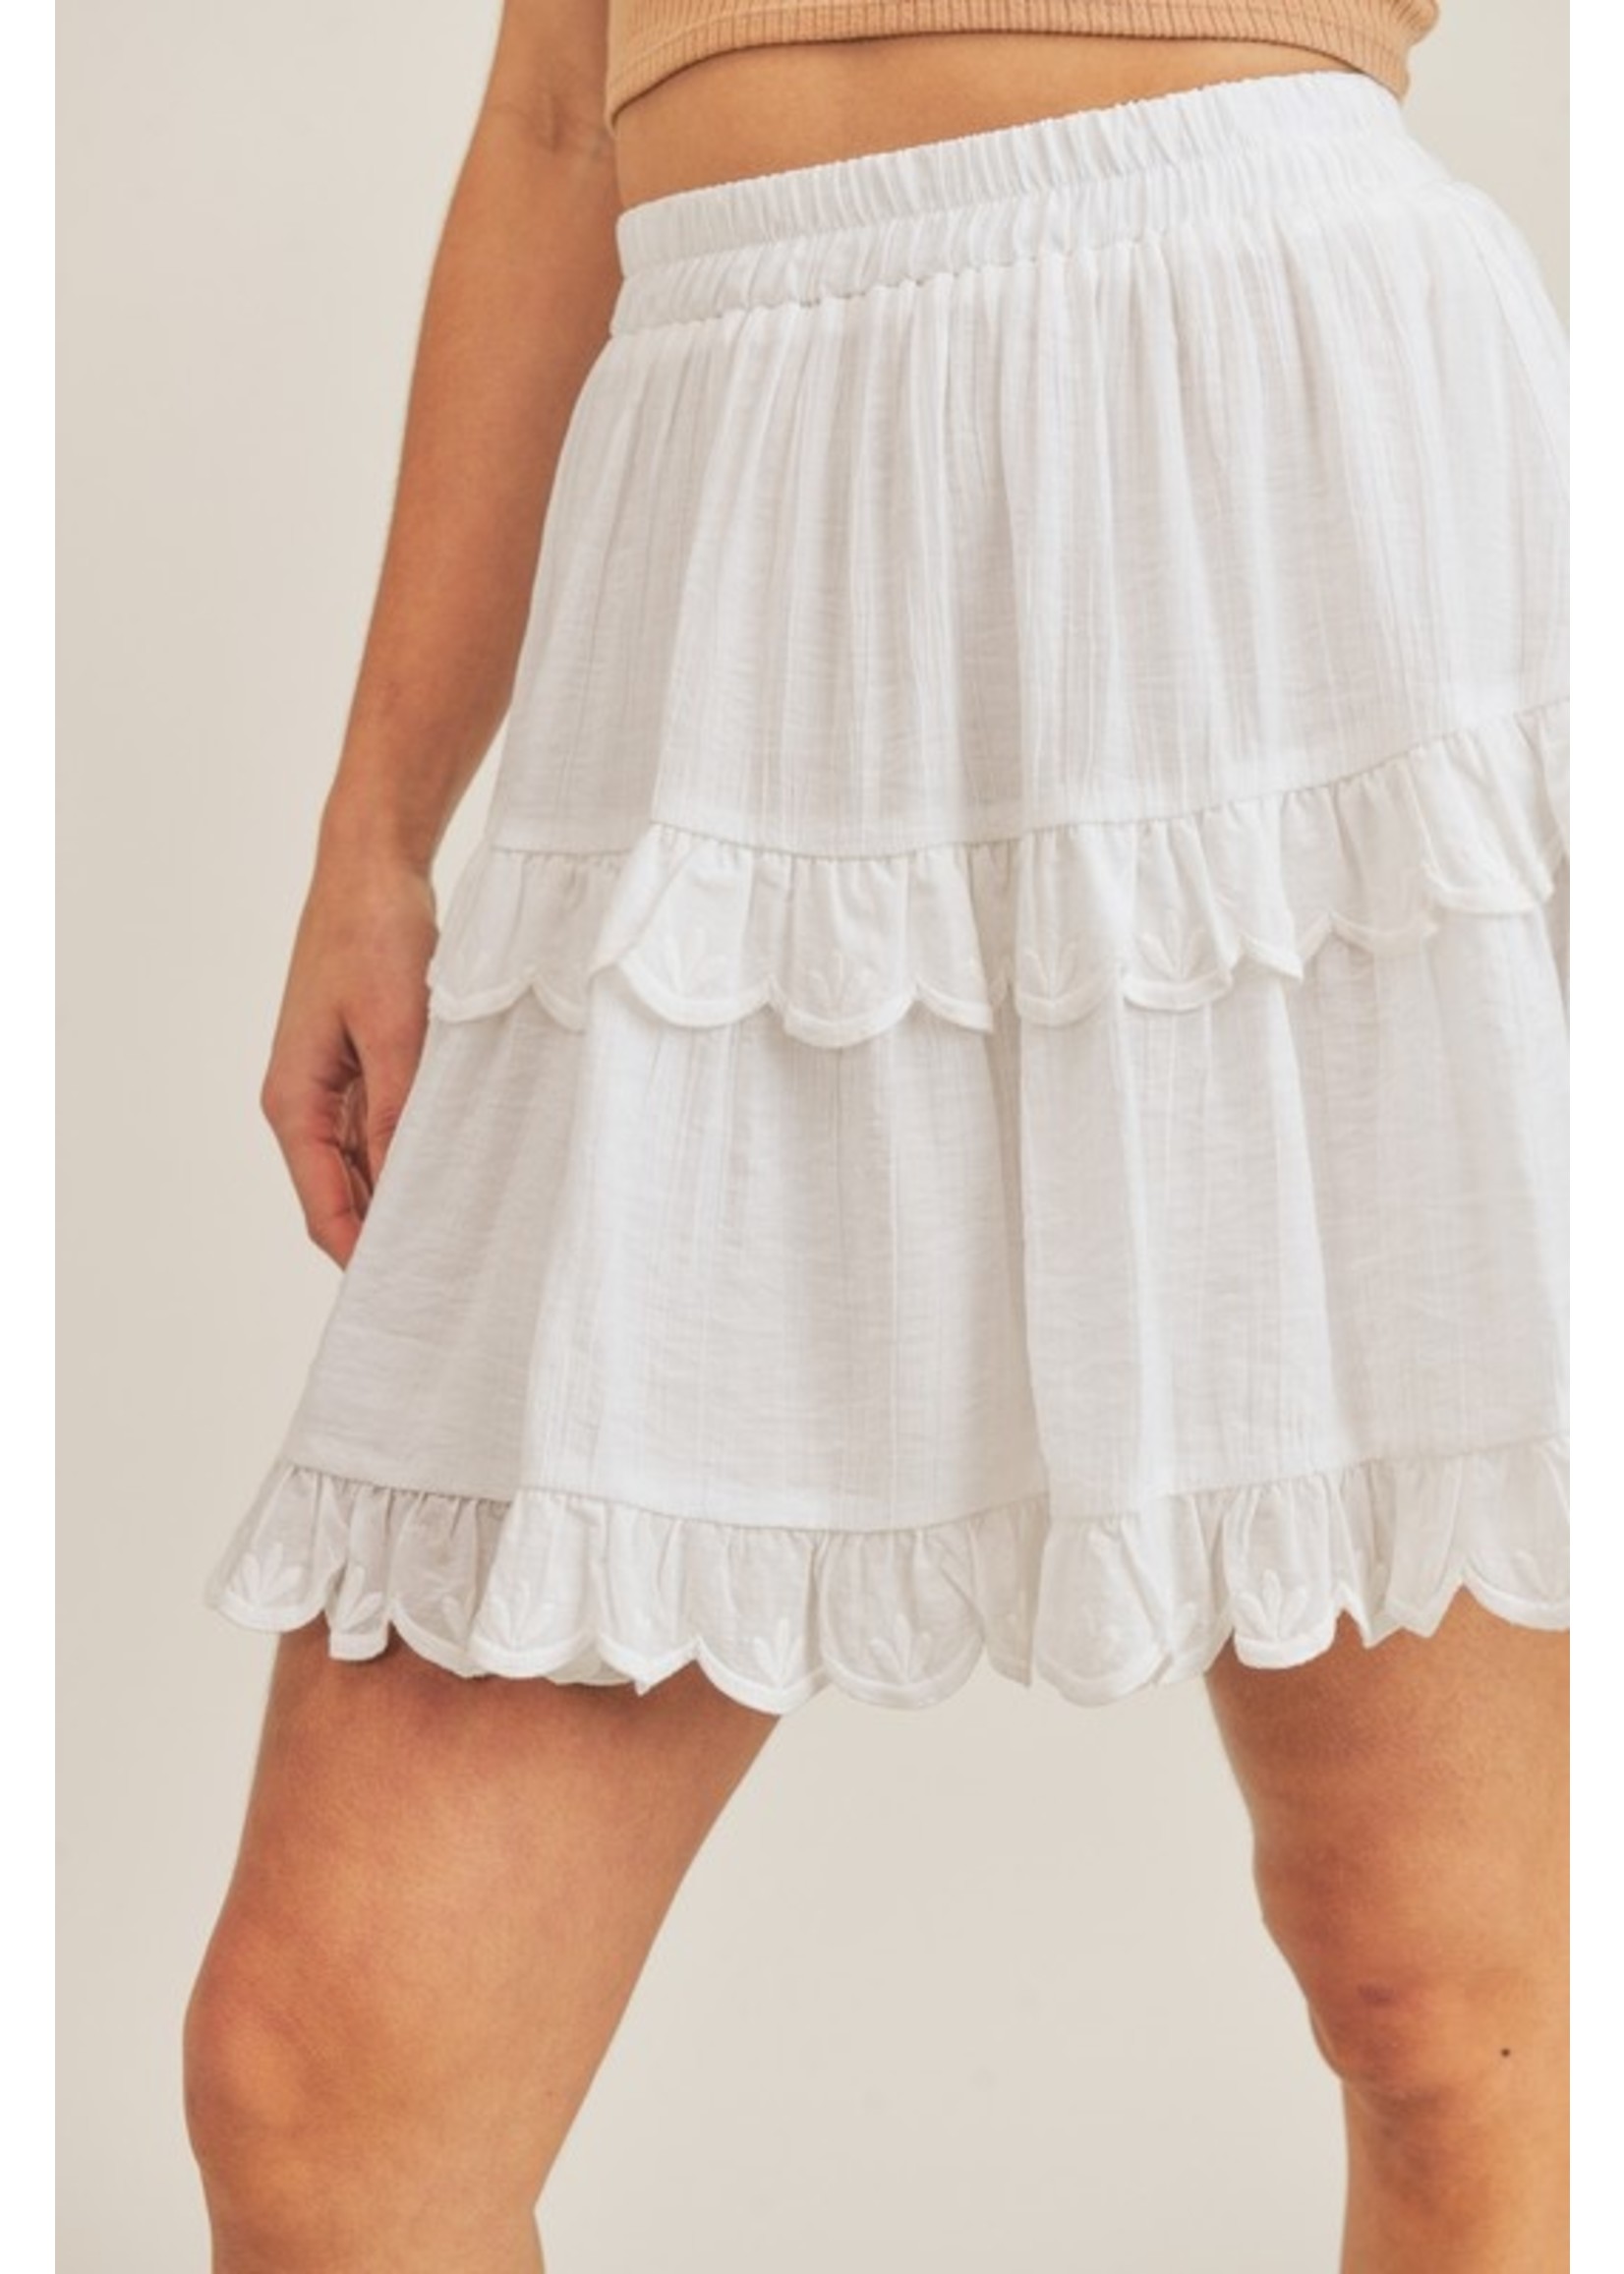 Woven Lace Trim Skirt Off White